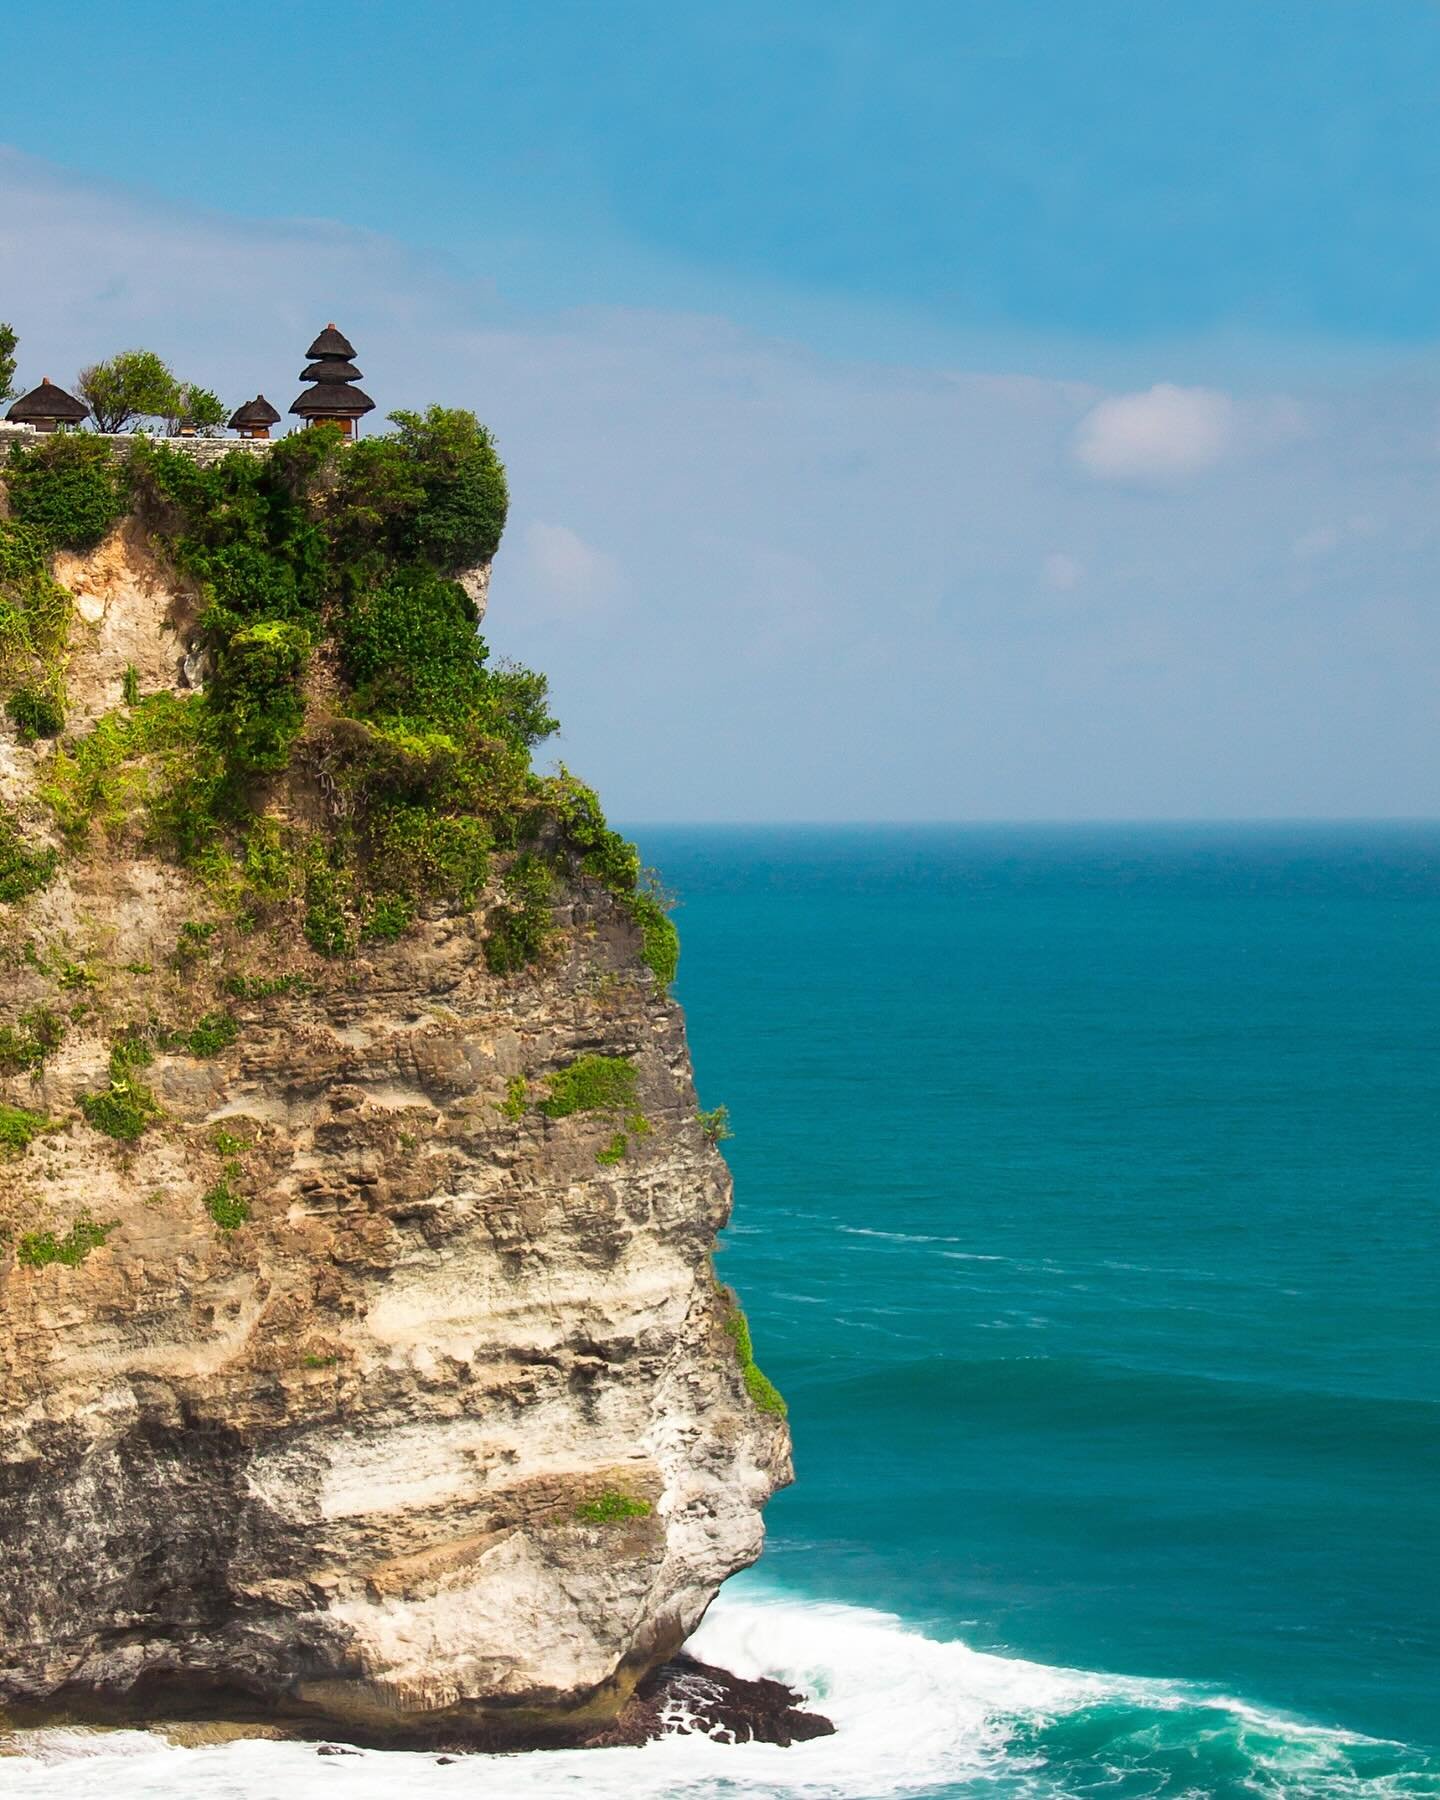 U L U W A T U - Derived from &ldquo;ulu,&rdquo; meaning &ldquo;lands end,&rdquo; and &ldquo;watu,&rdquo; meaning &ldquo;rock,&rdquo; the name &ldquo;Uluwatu&rdquo; aptly underscores its geographical prominence. 

🌺 Through the ages, the Uluwatu Clif